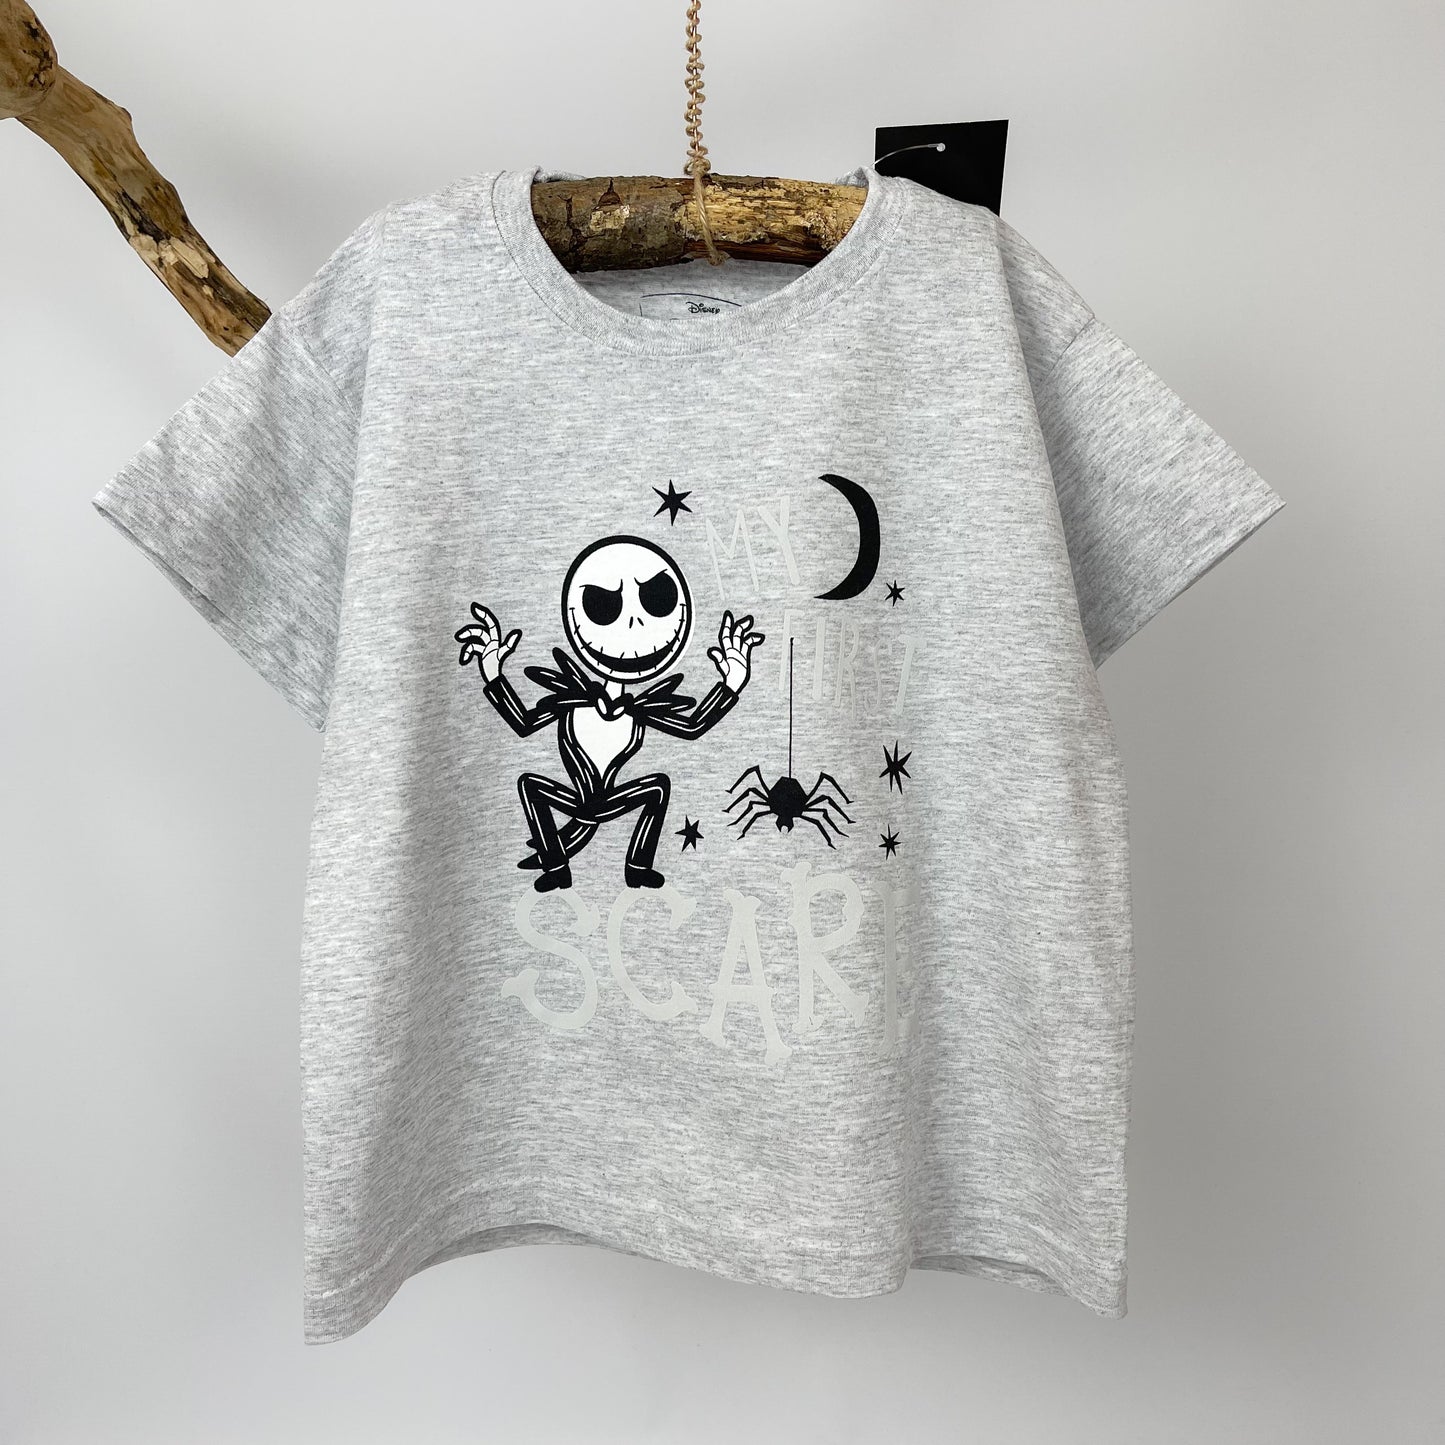 THE NIGHTMARE BEFORE CHRISTMAS FIRST SCARE T-SHIRT